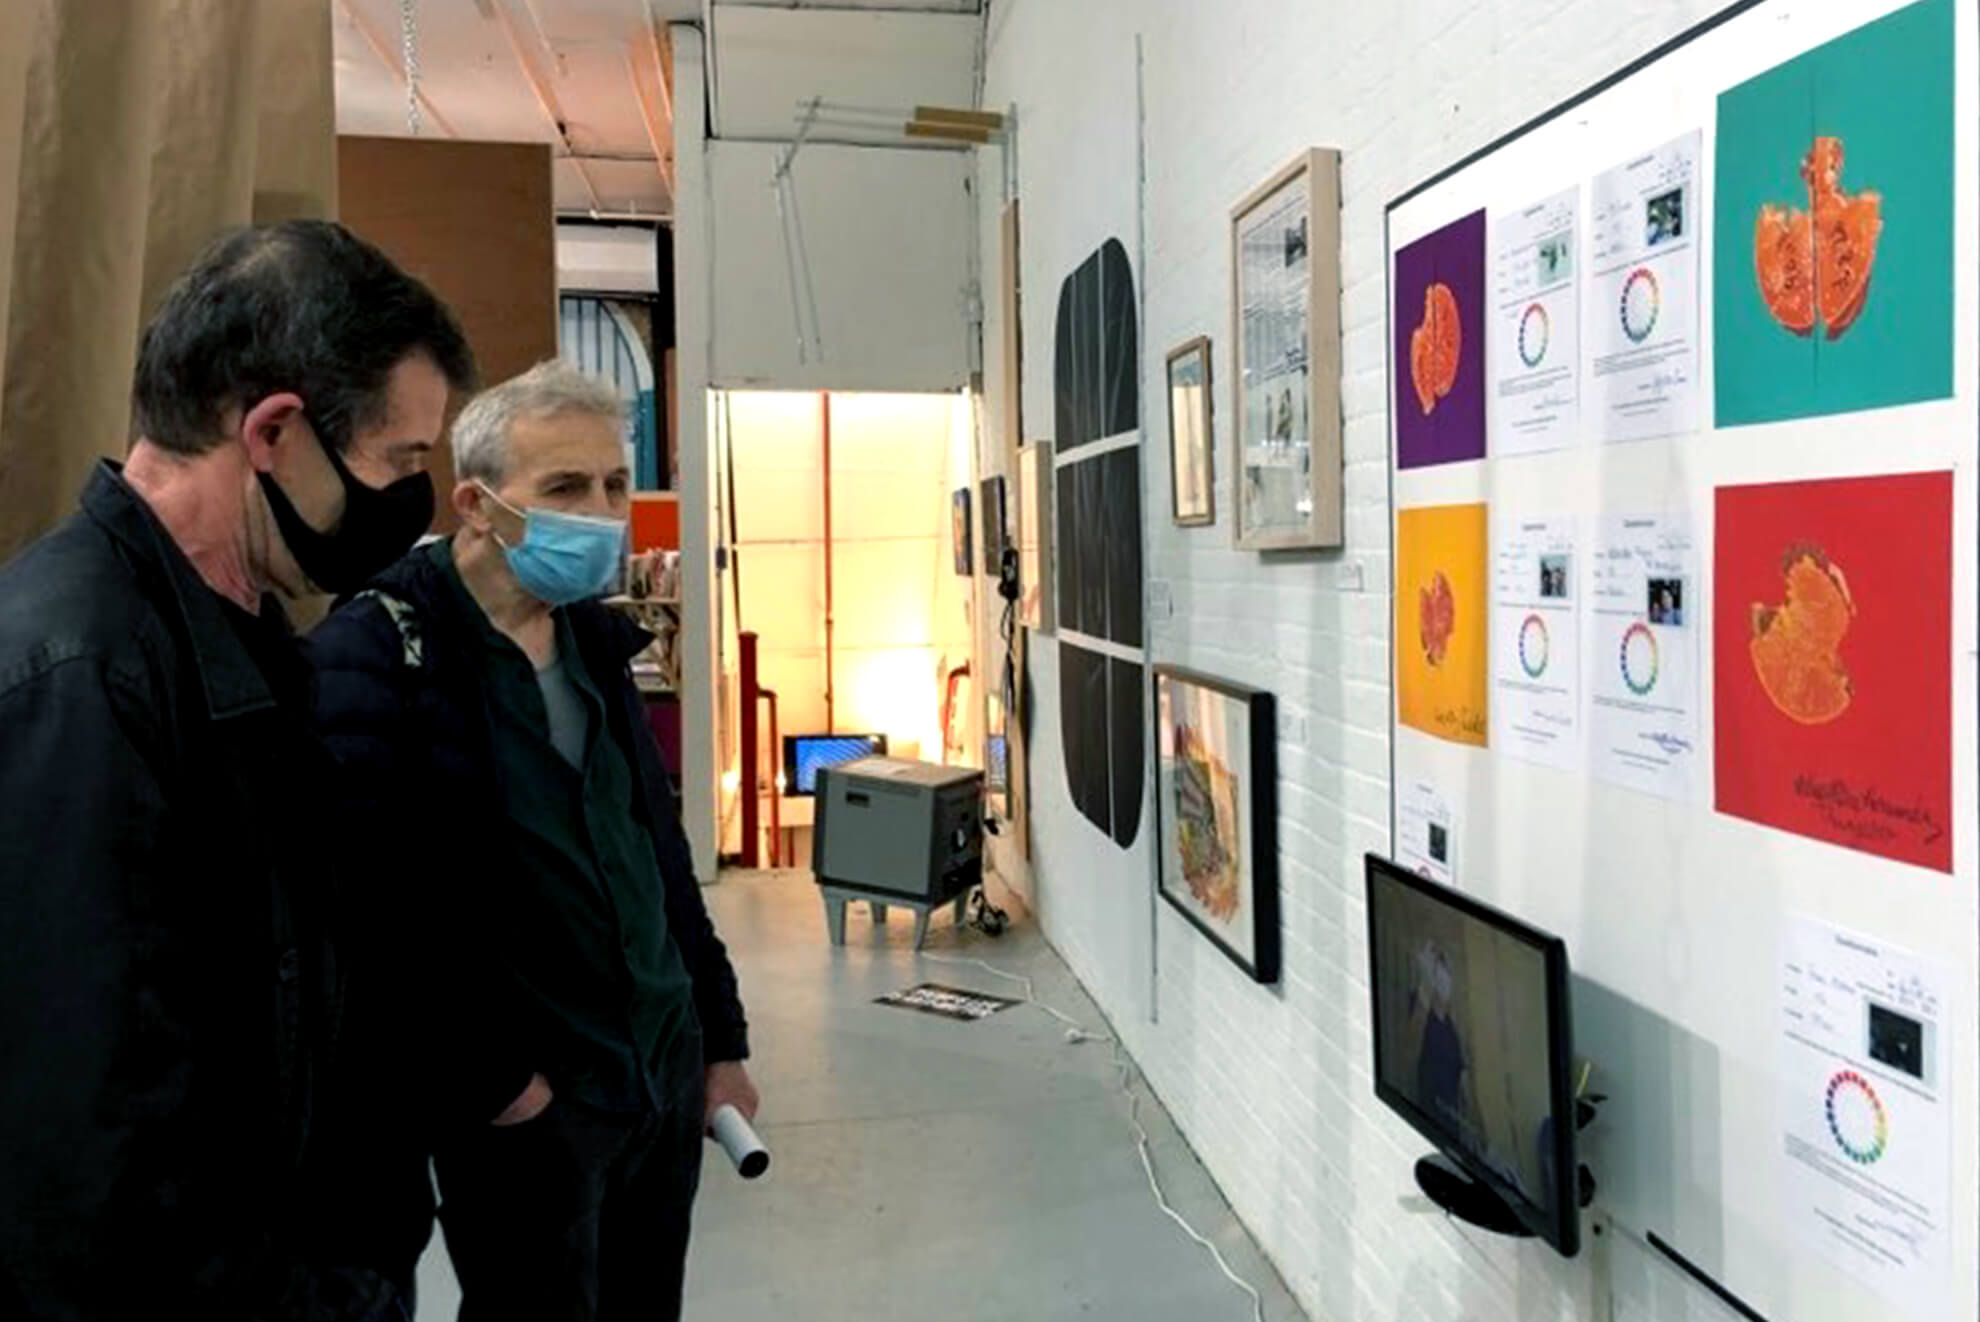 Image of Fluxus Jeffrey and Emily Harvey Foundation director looking at the work of a project where Shintaku bites a hamburger with a homeless in LA